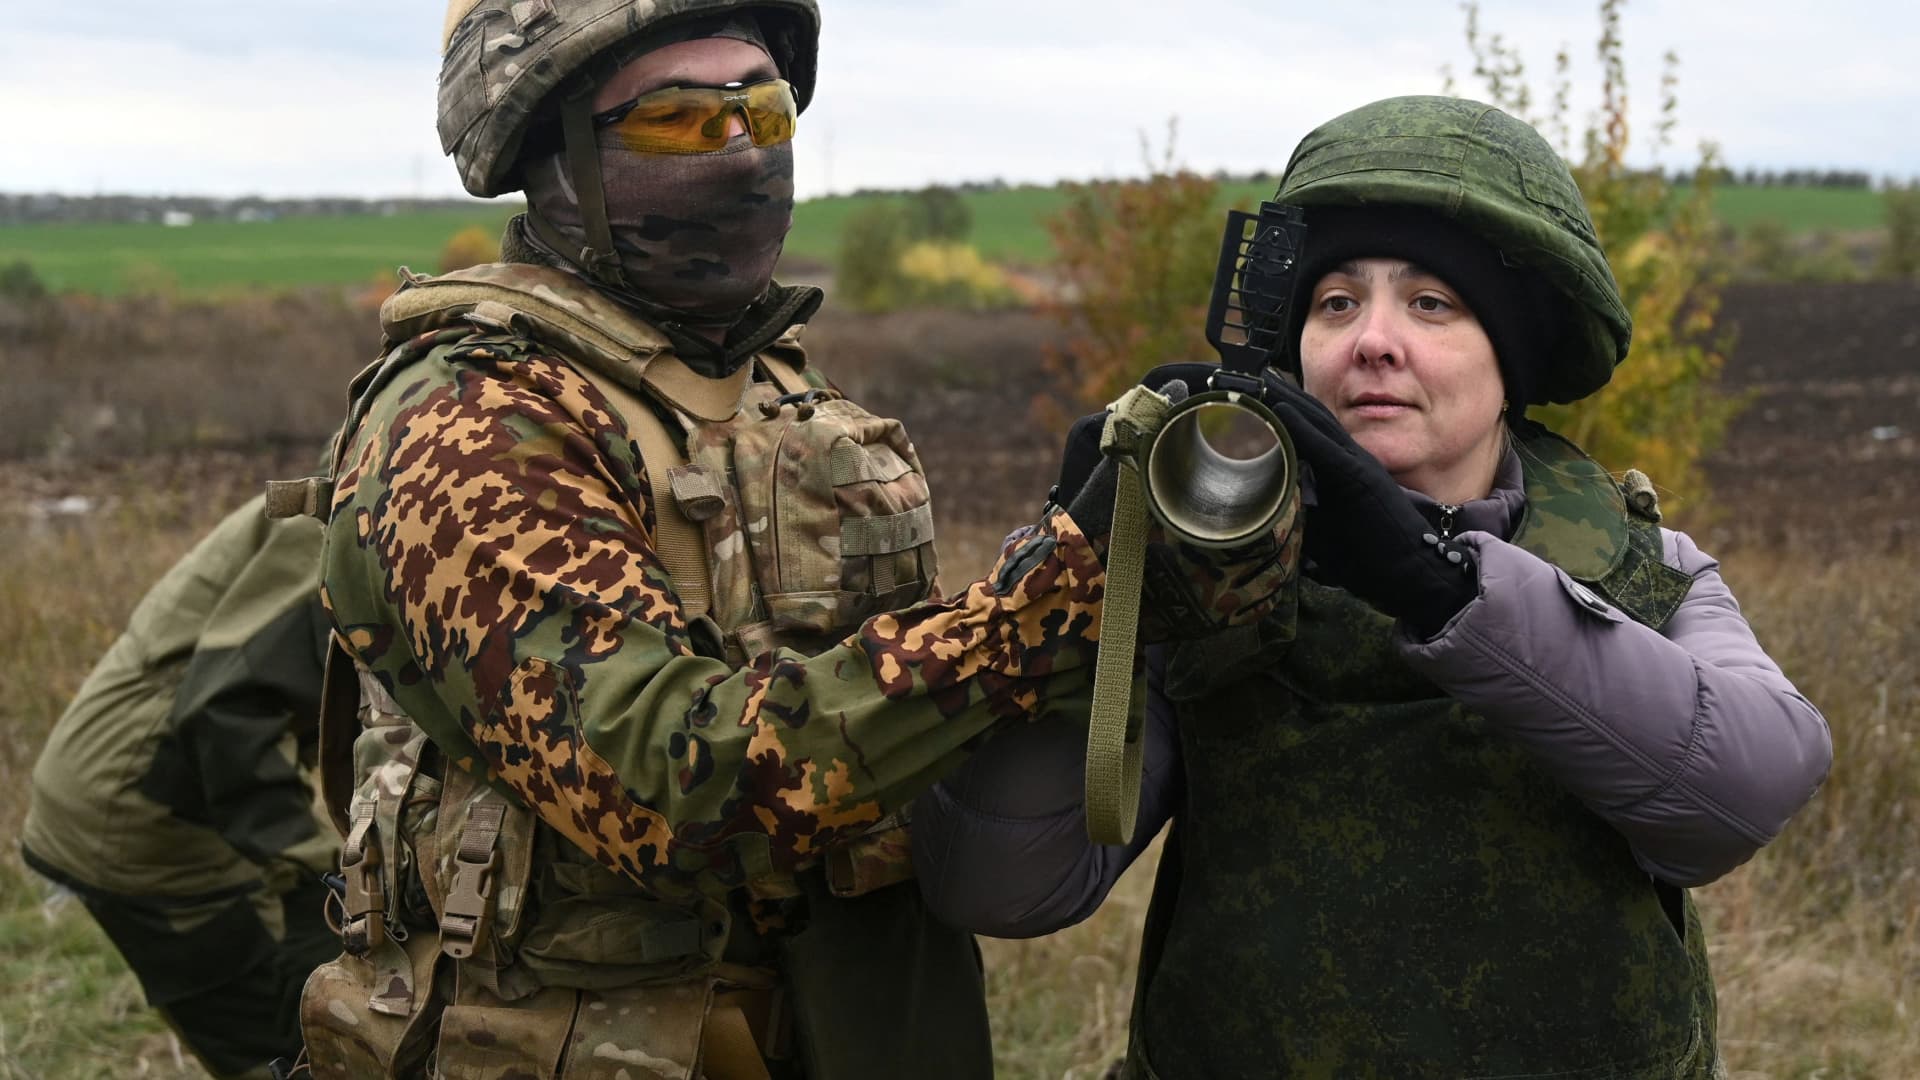 A woman receives instructions during a combat training session for civilians organised by local authorities at a range in Rostov Region, Russia October 21, 2022.